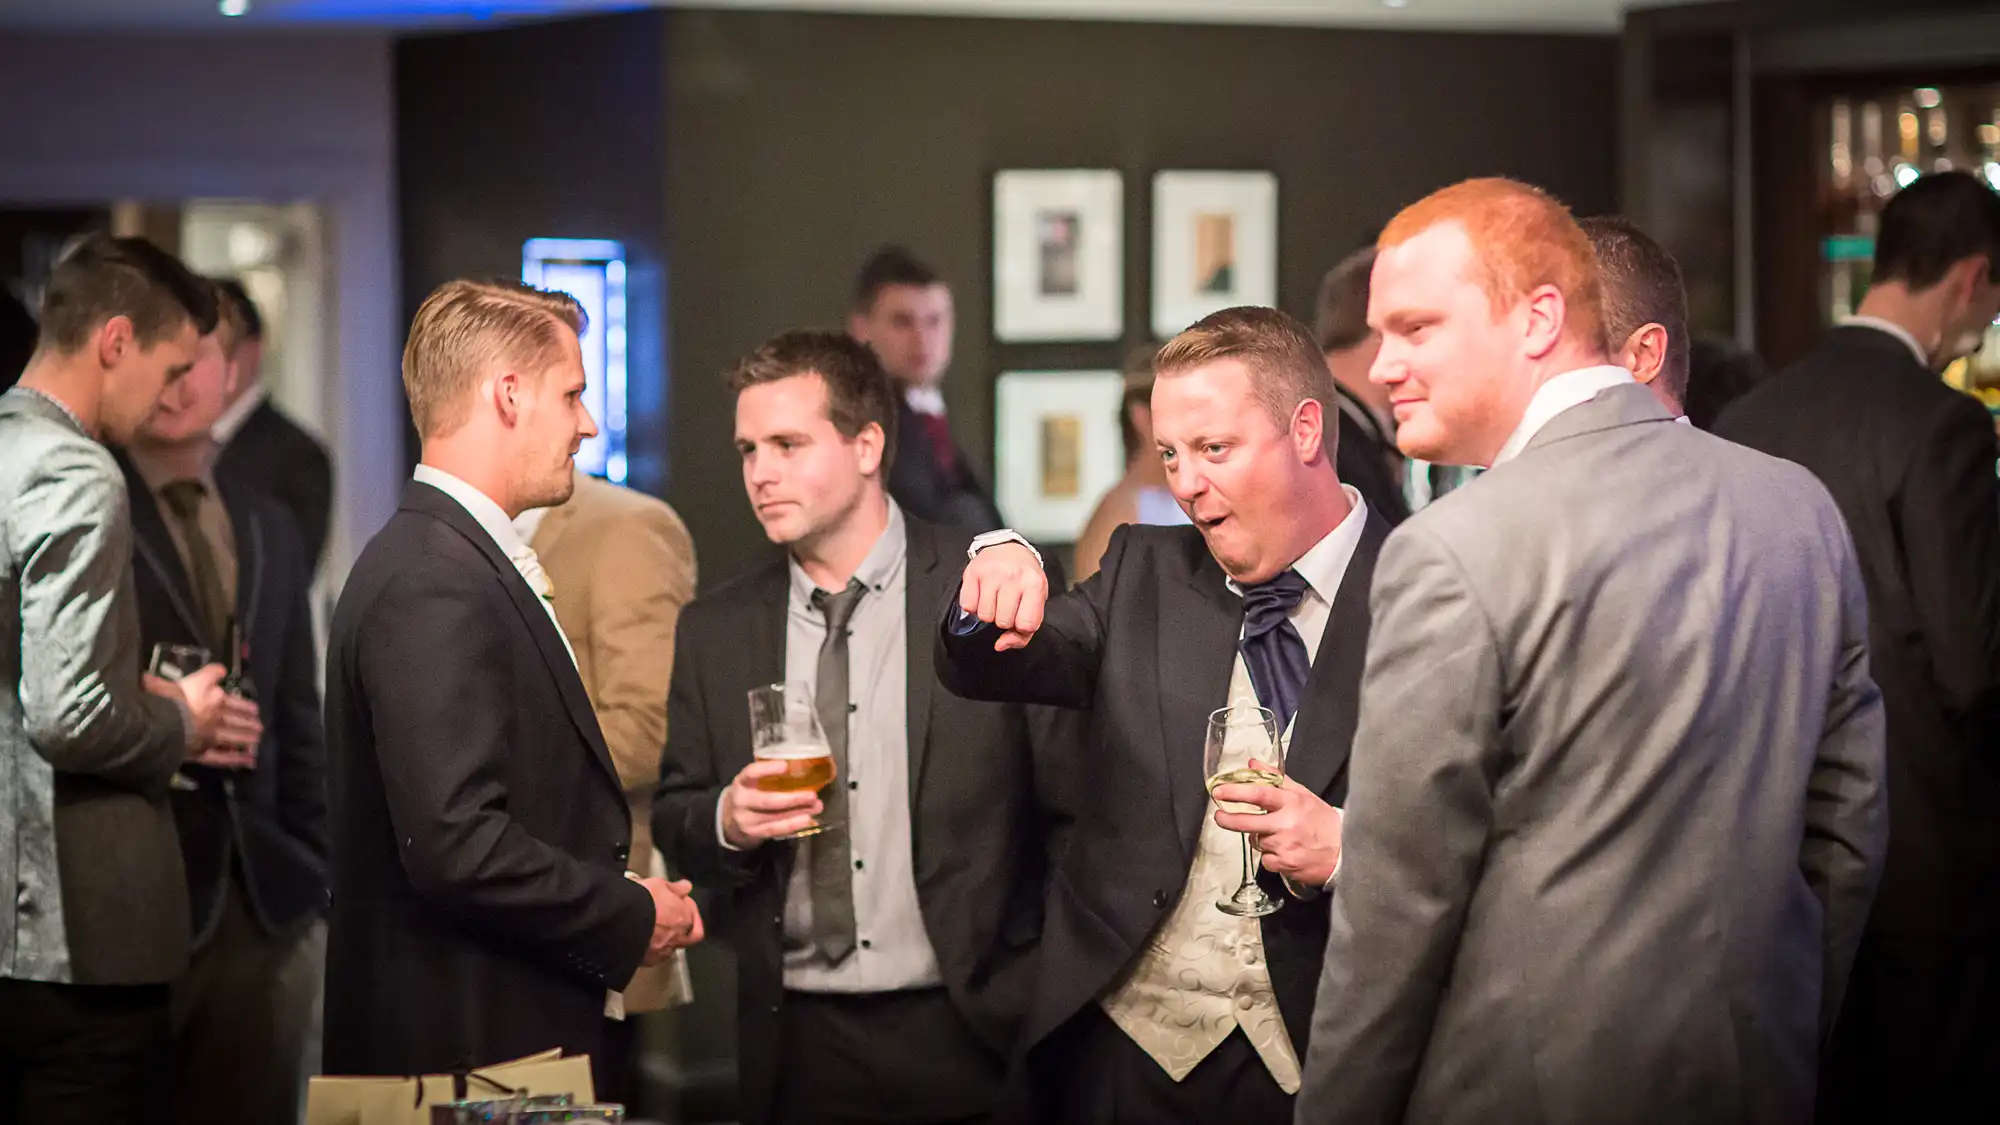 Group of men in suits engaged in conversations at a formal event, some holding drinks.